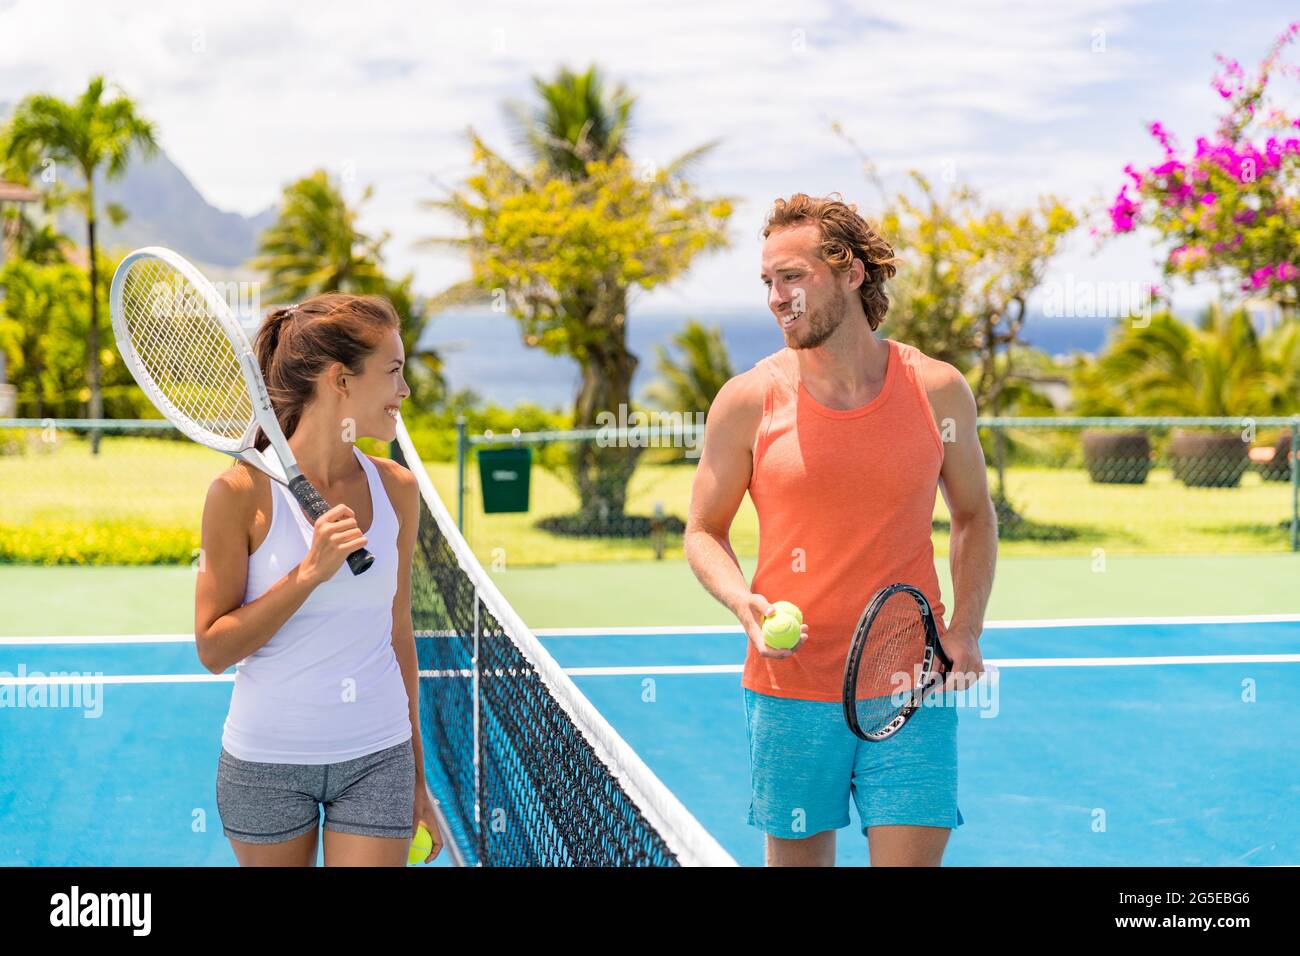 Tennis players friends having fun laughing playing on outdoor court. Couple or mixed double tennis partners outside in summer. Happy young people Stock Photo